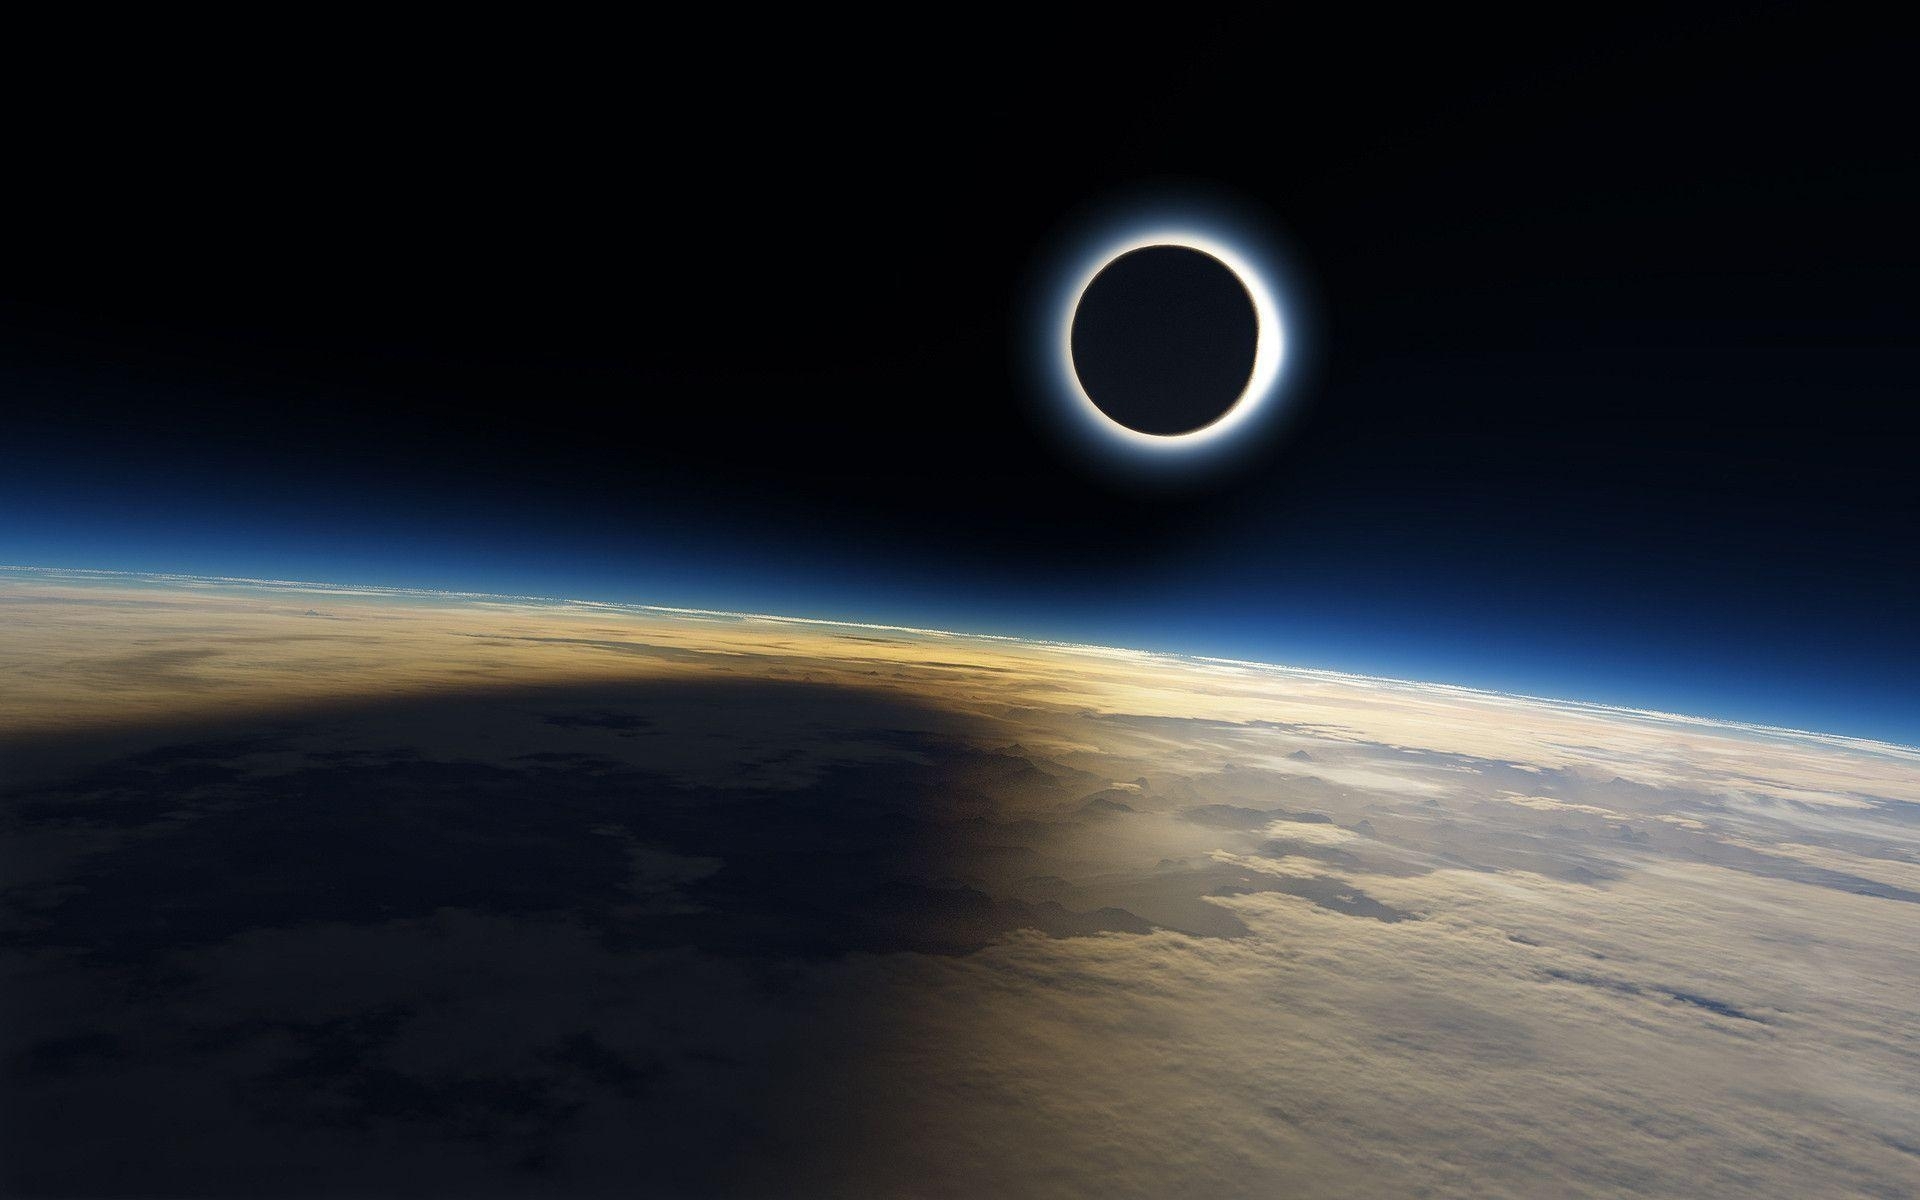 eclipse free download for windows